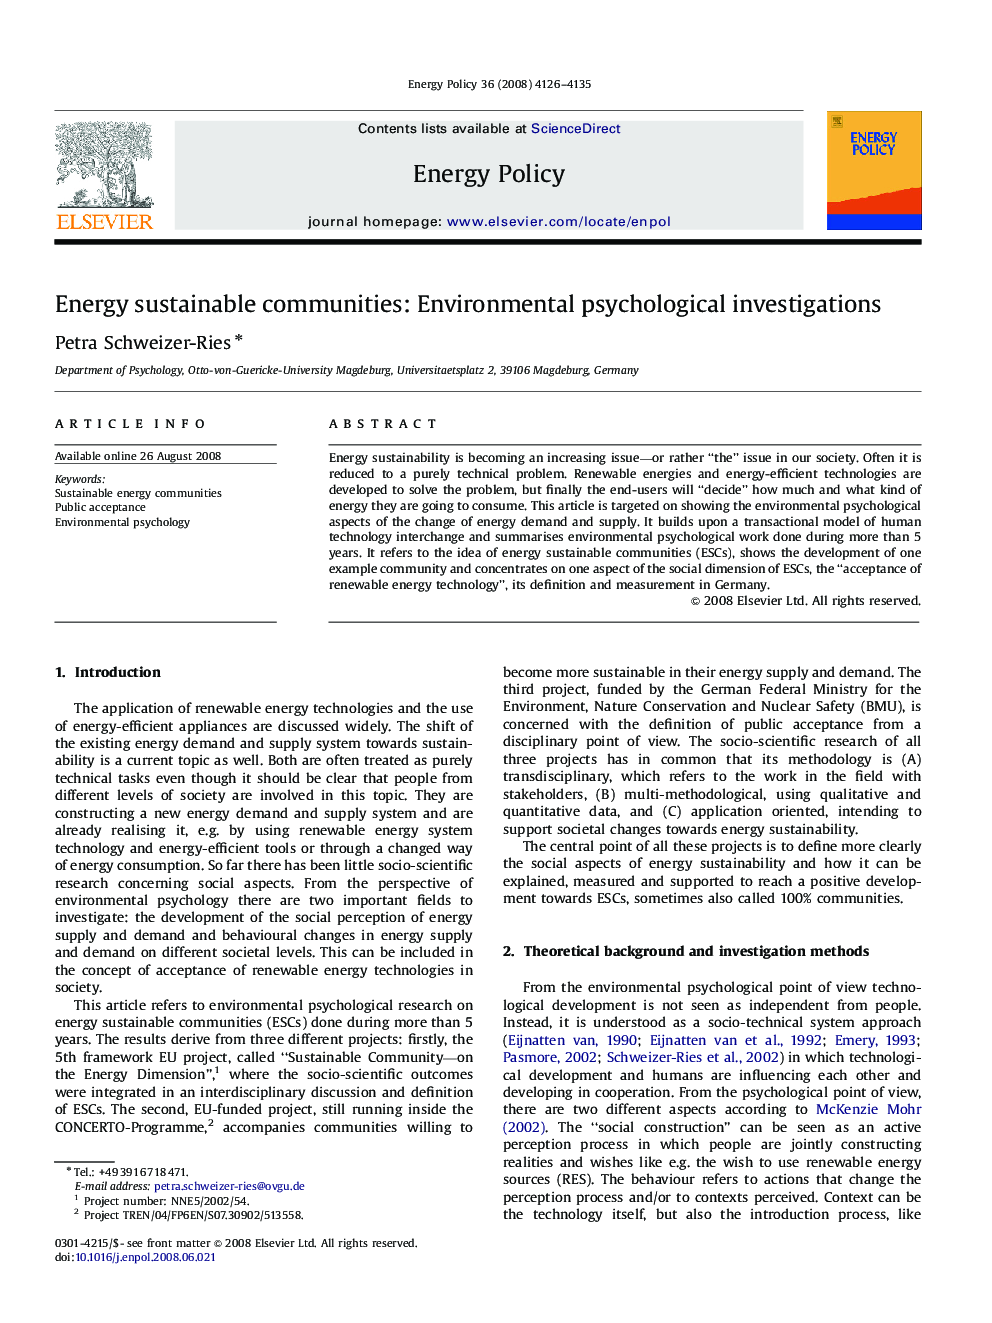 Energy sustainable communities: Environmental psychological investigations